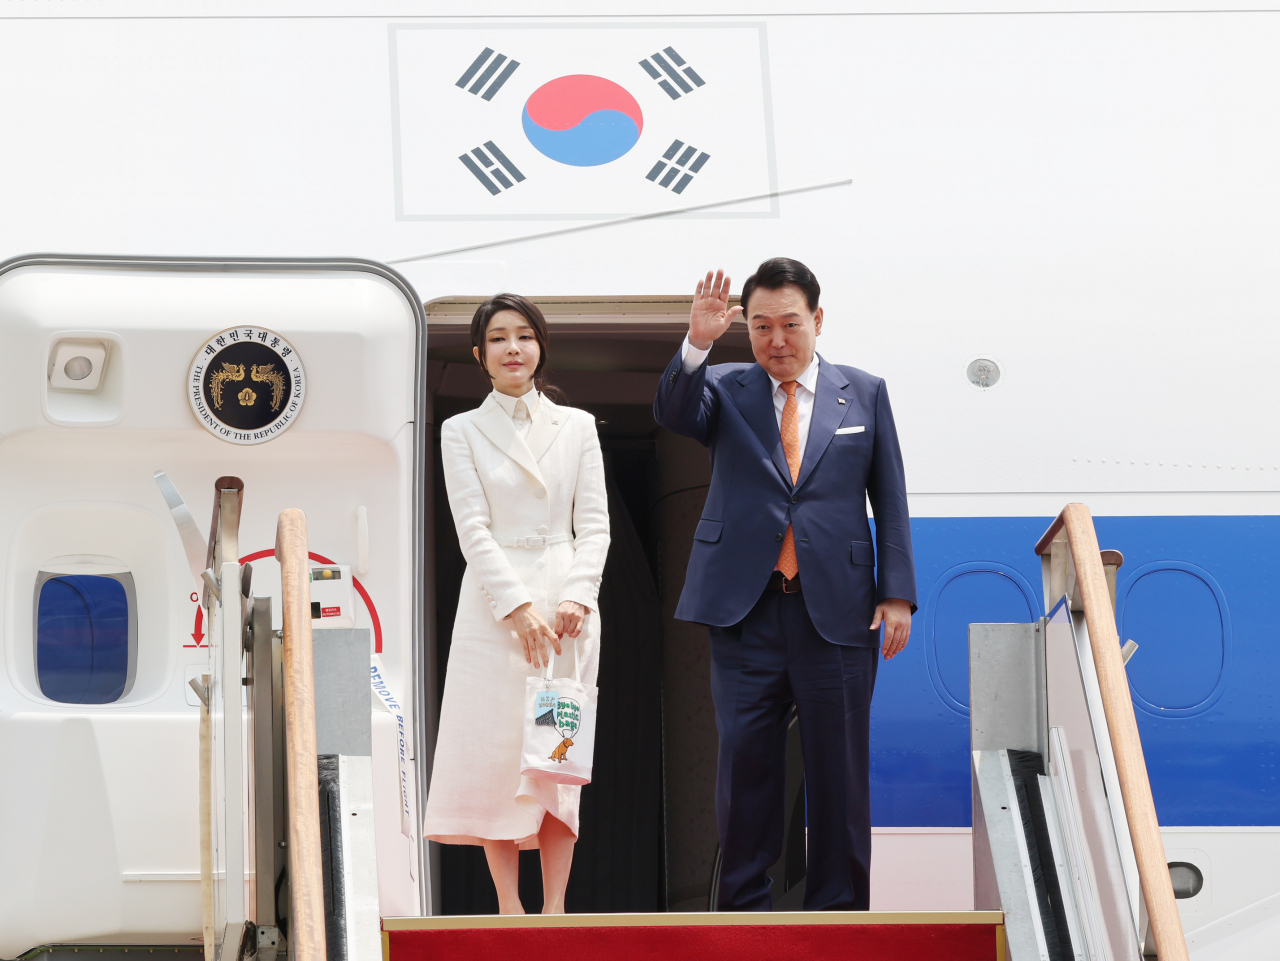 President Yoon Suk Yeol (right) waves before boarding Air Force One at Seoul Air Base in Seongnam, Gyeonggi Province, with first lady Kim Keon Hee on Monday. (Yonhap)